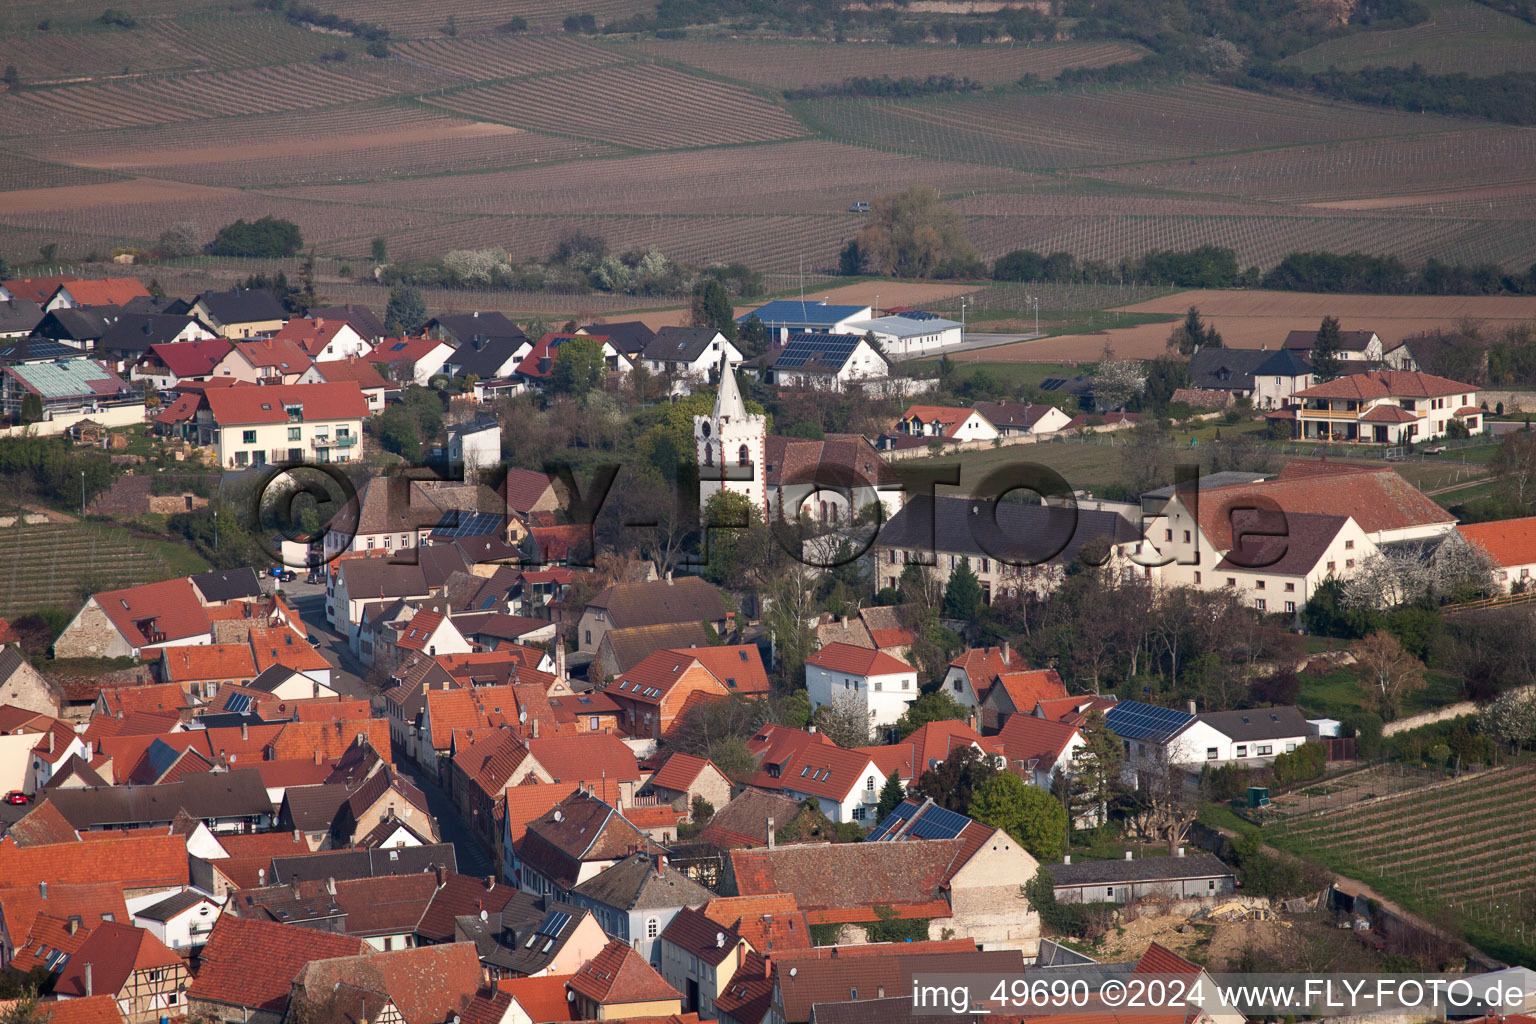 Town View of the streets and houses of the residential areas in Bockenheim an der Weinstrasse in the state Rhineland-Palatinate from above